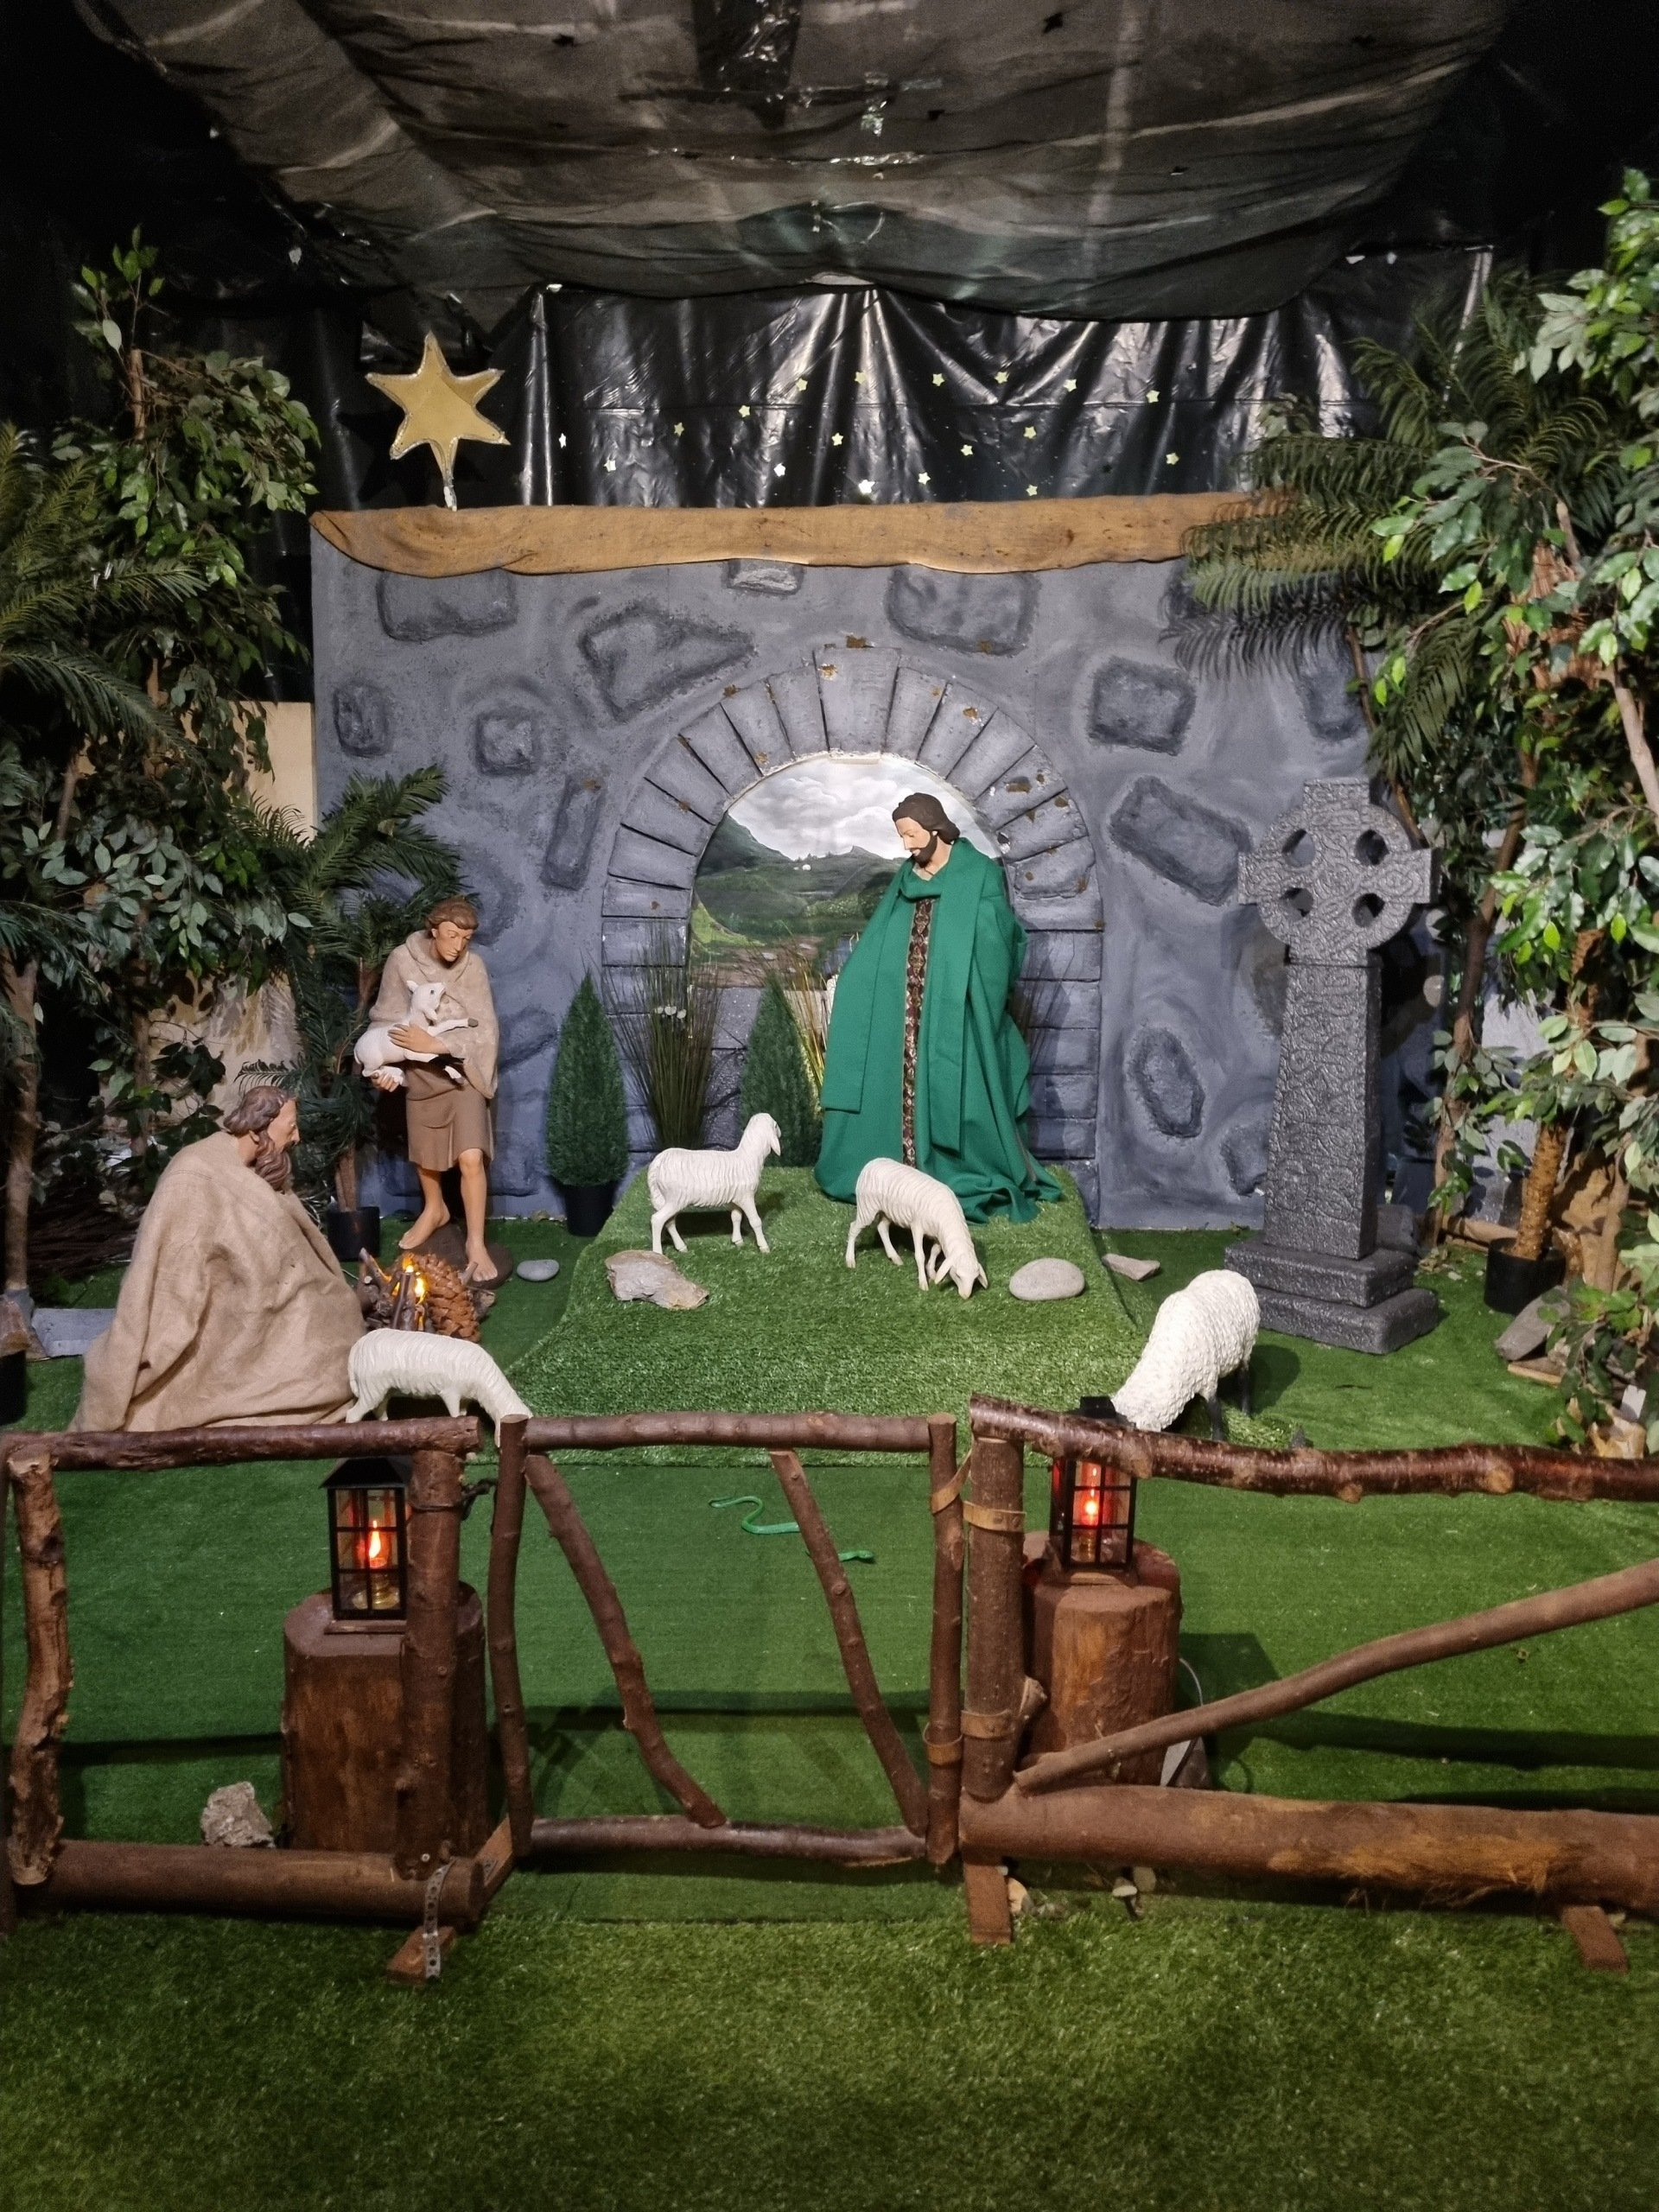 A nativity scene with a fence and sheep in the grass.